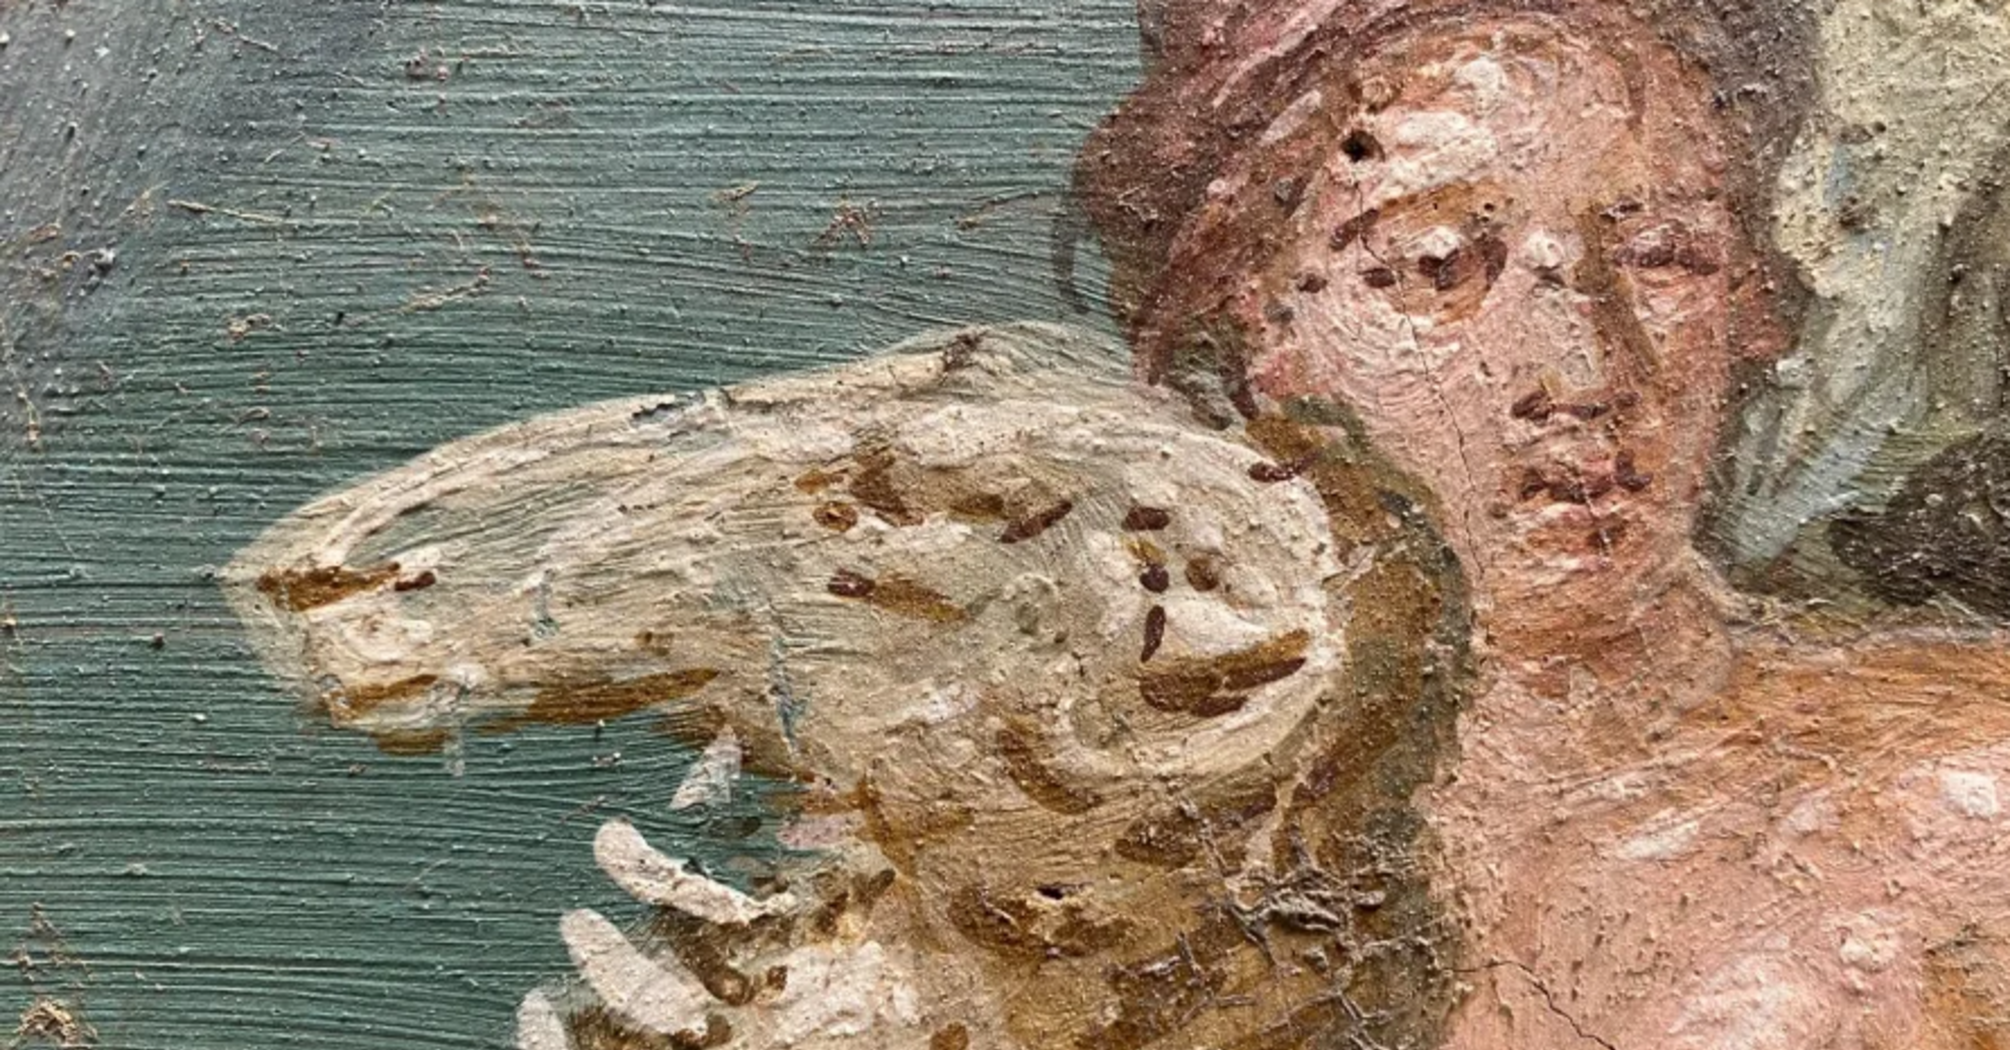 A 2000-year-old fresco in excellent condition discovered in Pompeii